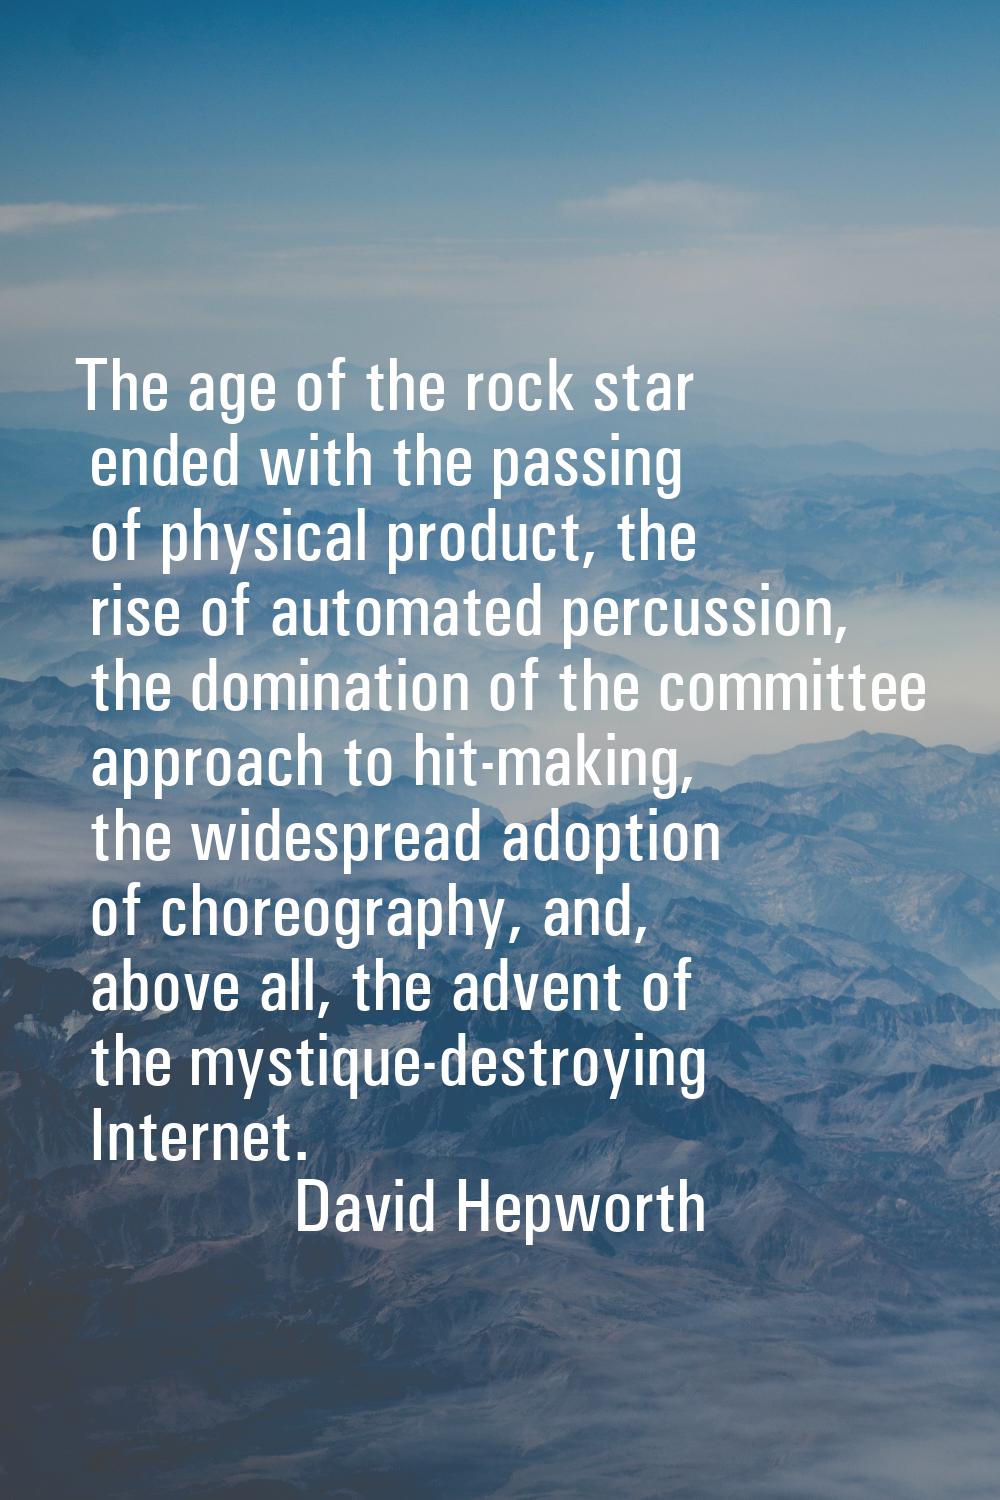 The age of the rock star ended with the passing of physical product, the rise of automated percussi